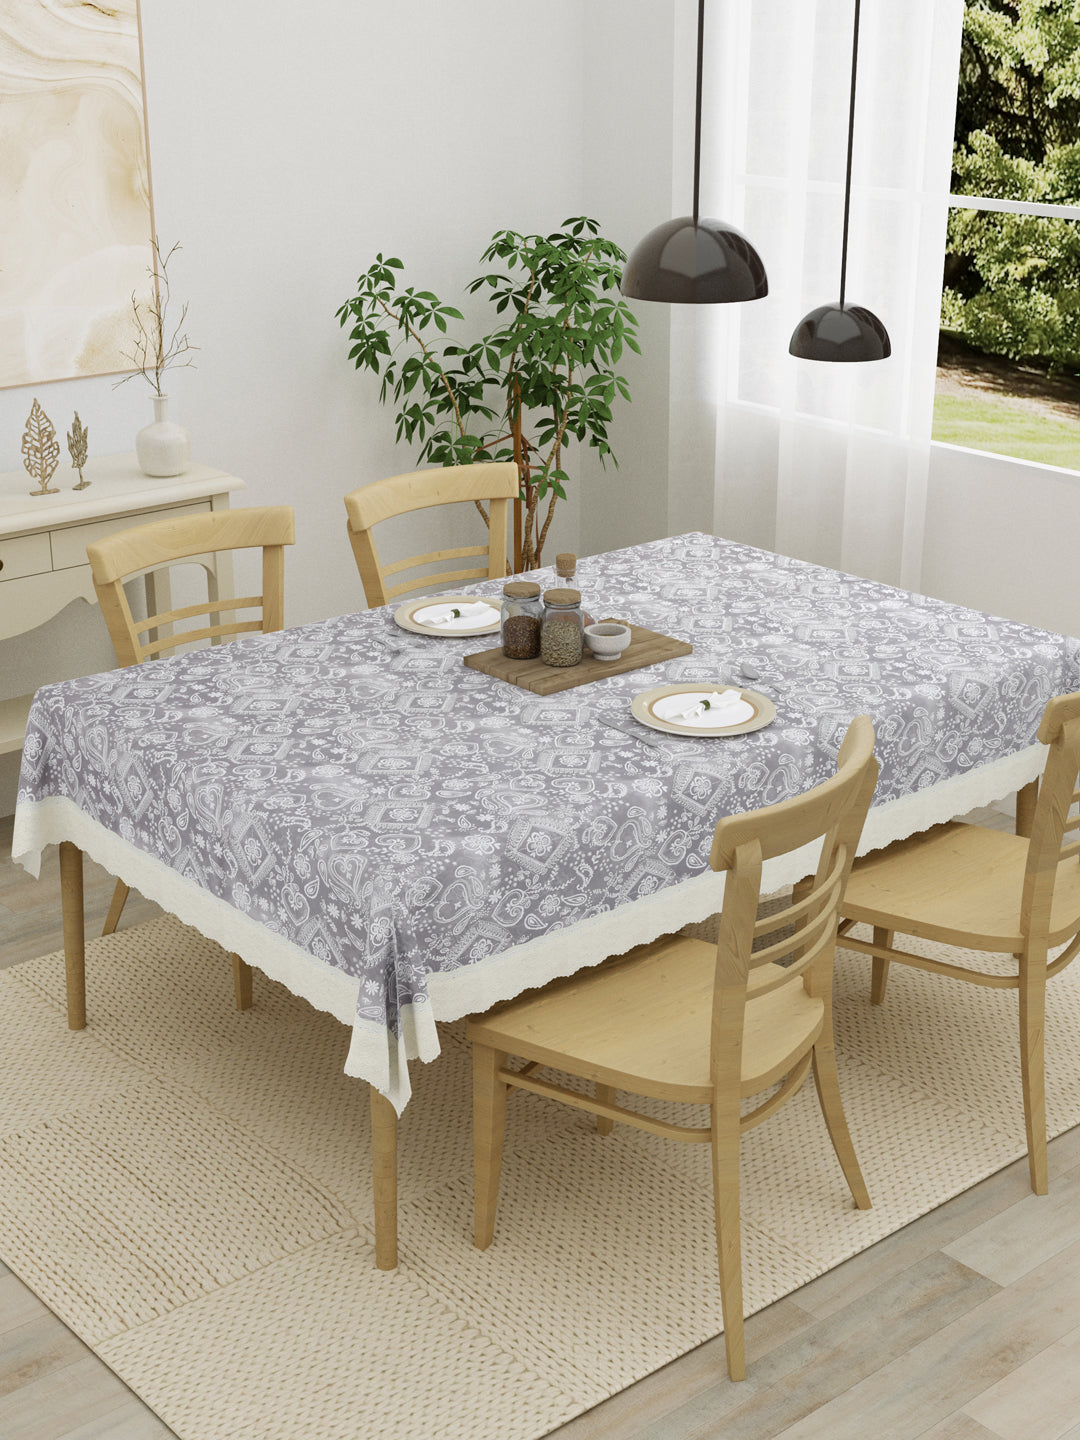 4 Seater Dining Table Cover; Material - PVC; Anti Slip; White Print On Grey